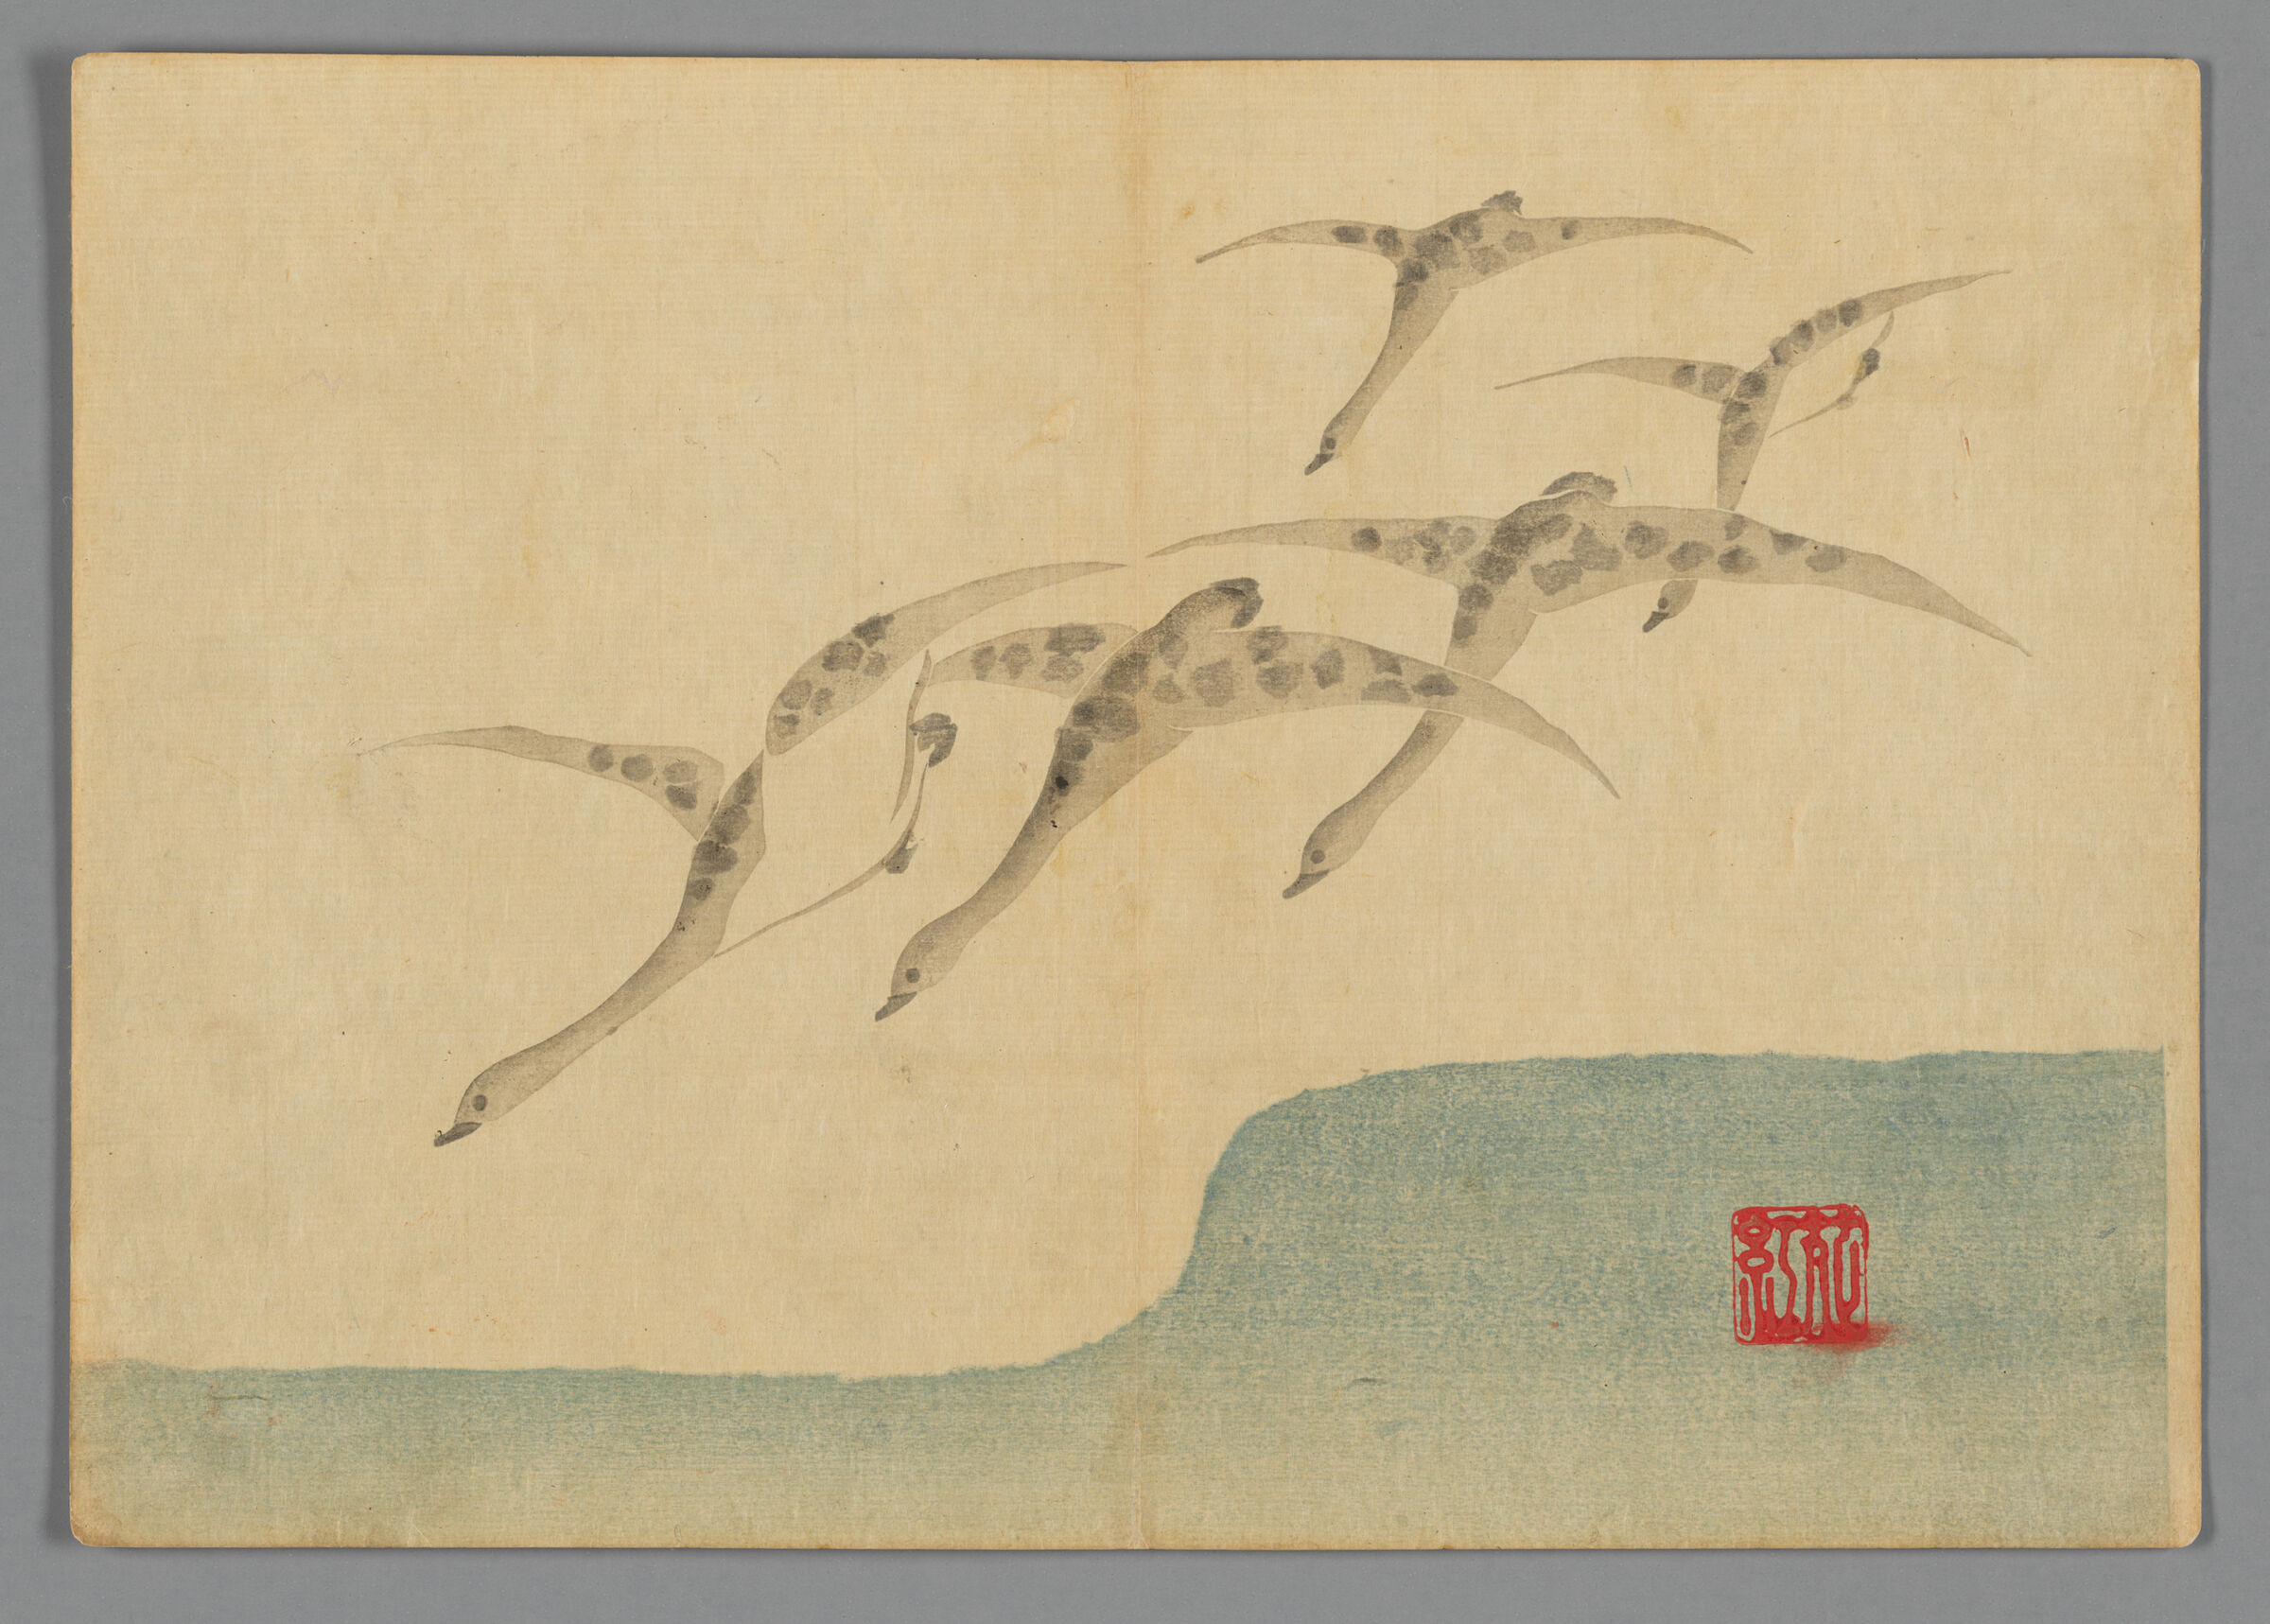 Geese Over Water, From The Kōrin Gafu (Kōrin Picture Album)